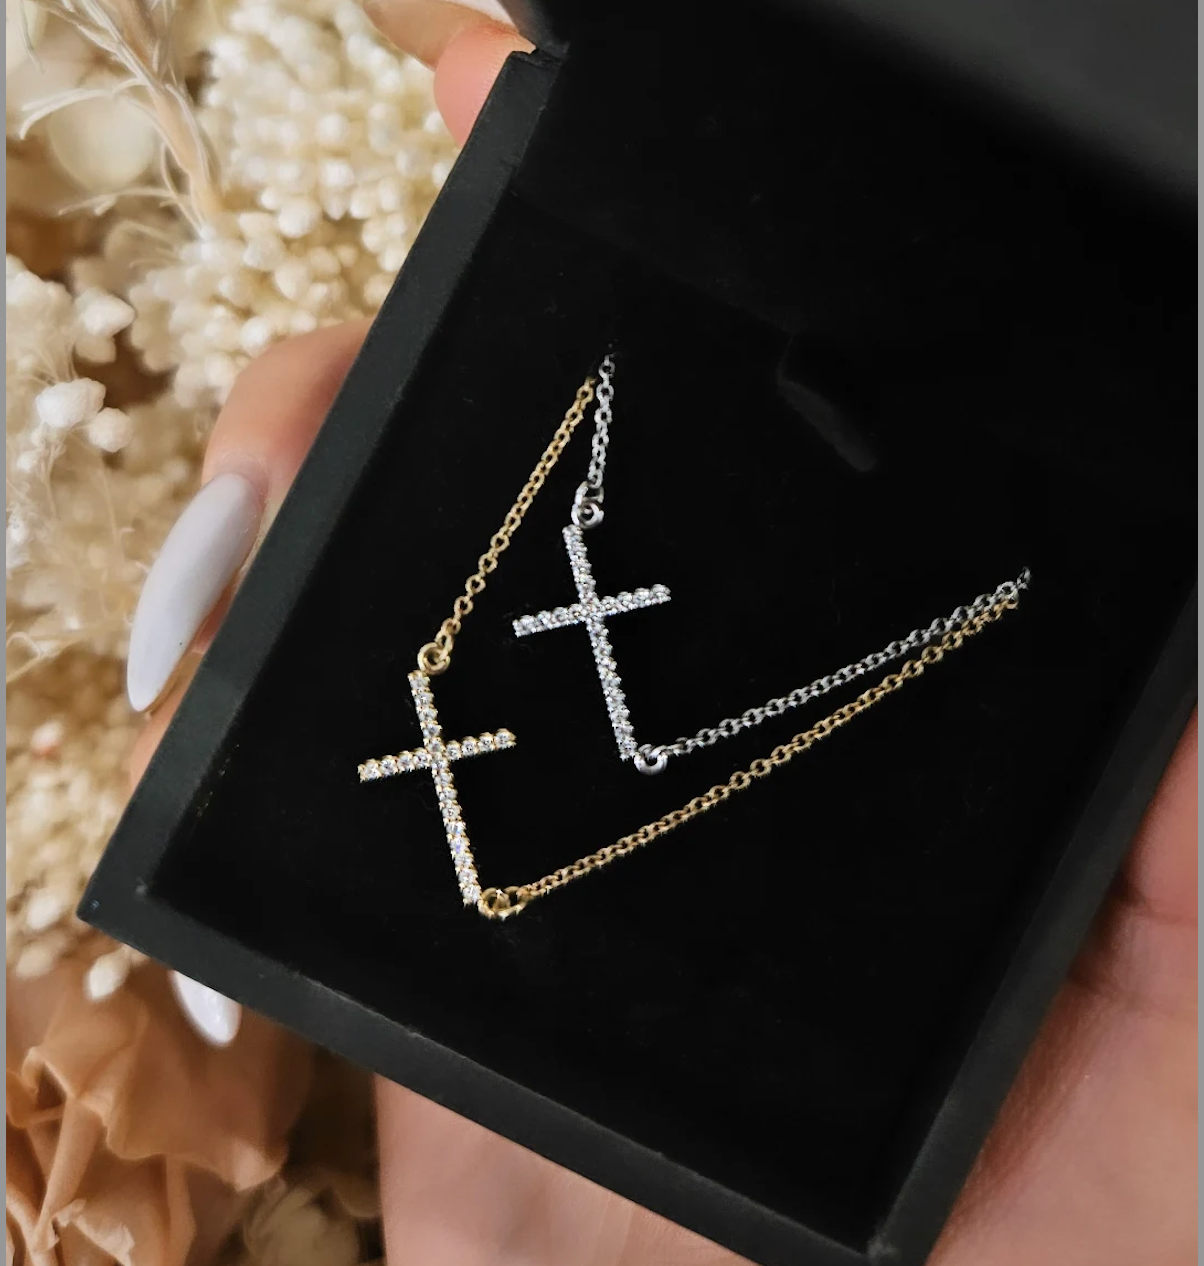 Sterling Silver Cross Necklace, Sideways Cross Necklace, Everyday Wear,  Cross Choker, Birthday Gift for Her, Valentines Day Gift for Her - Etsy | Cross  necklace sideways, Cross choker necklace, Cross necklace silver